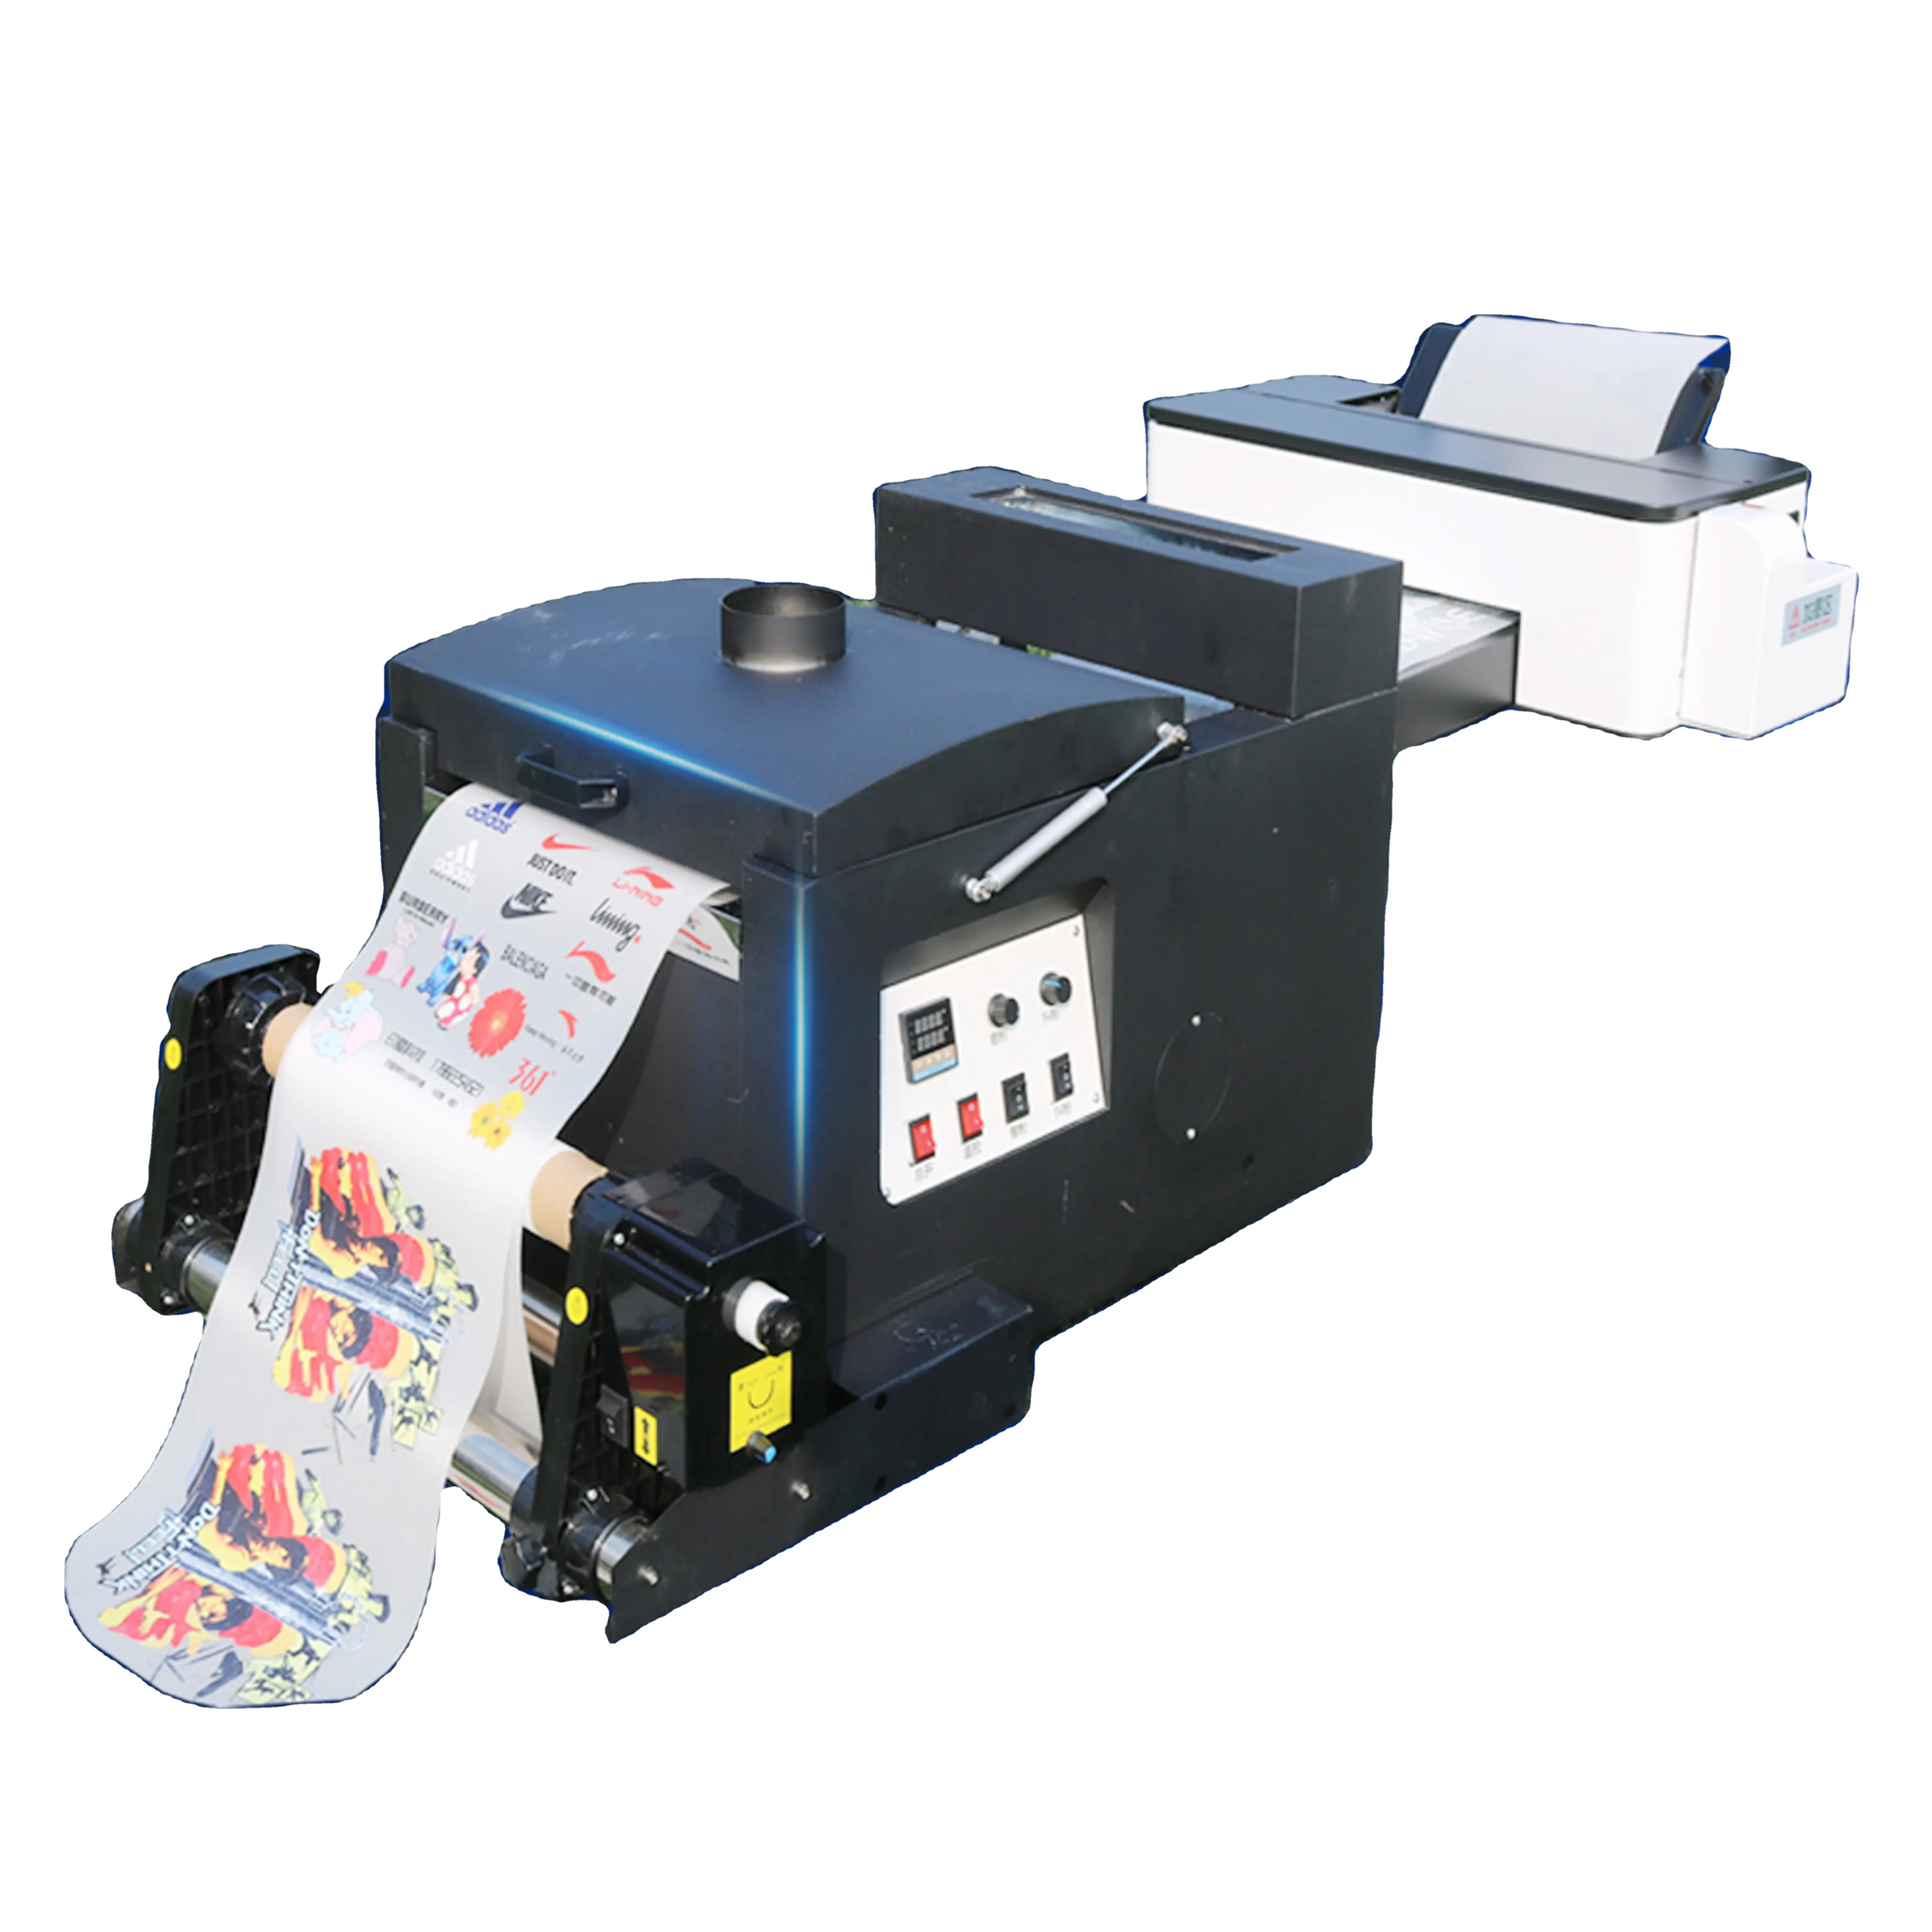 Dtf Printer Powder 5 Colors DTF Printer A3 Print DTF 4720 2 Heads DTF A4 Sheet A3 Size Automatic Powder Shaking